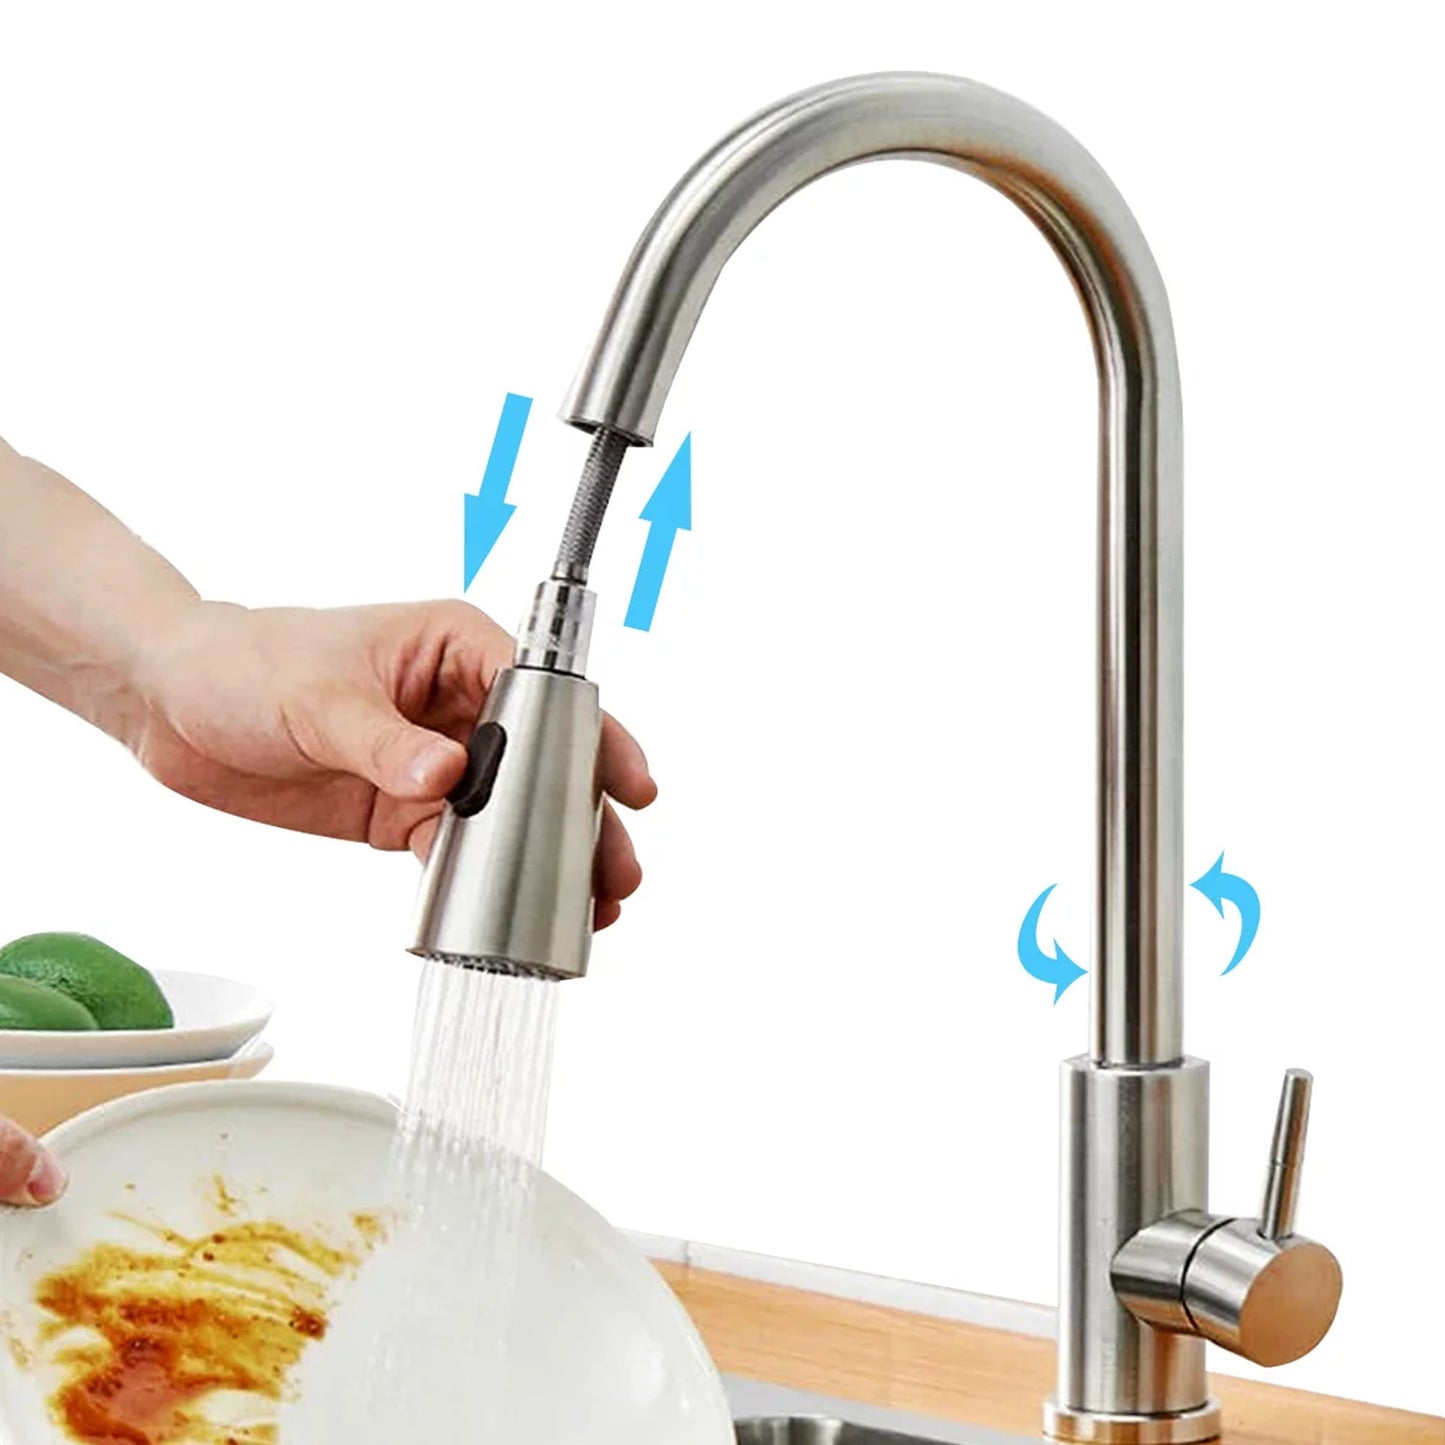 ROMUCHE Kitchen Sink Faucet with Pull Down Sprayer, Single Handle High Arc Brushed Nickel Pull Out Kitchen 360° Water Tap with 2 Modes Durable Stainless Steel Sink Faucet -G00014